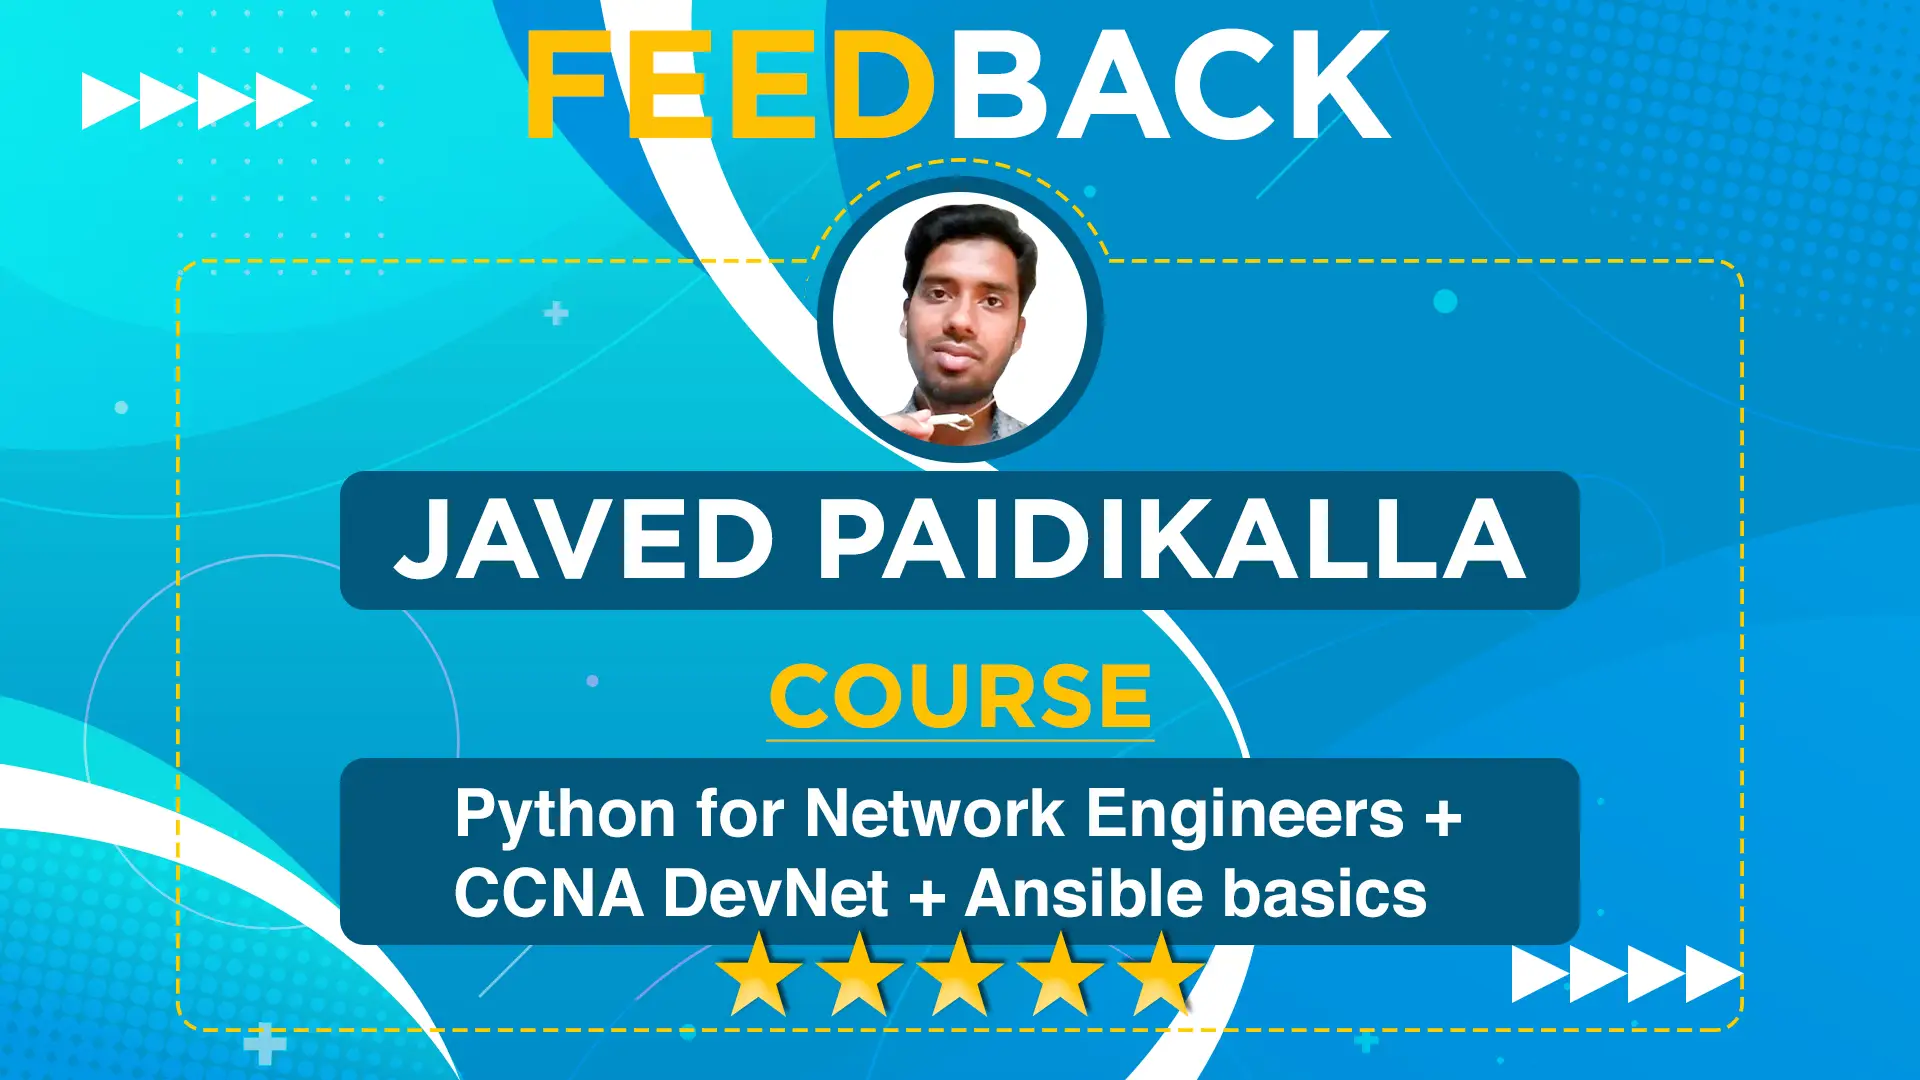 Feedback by Javed Paidikalla for Course Python for Network Engineers + CCNA DevNet + Ansible Basics